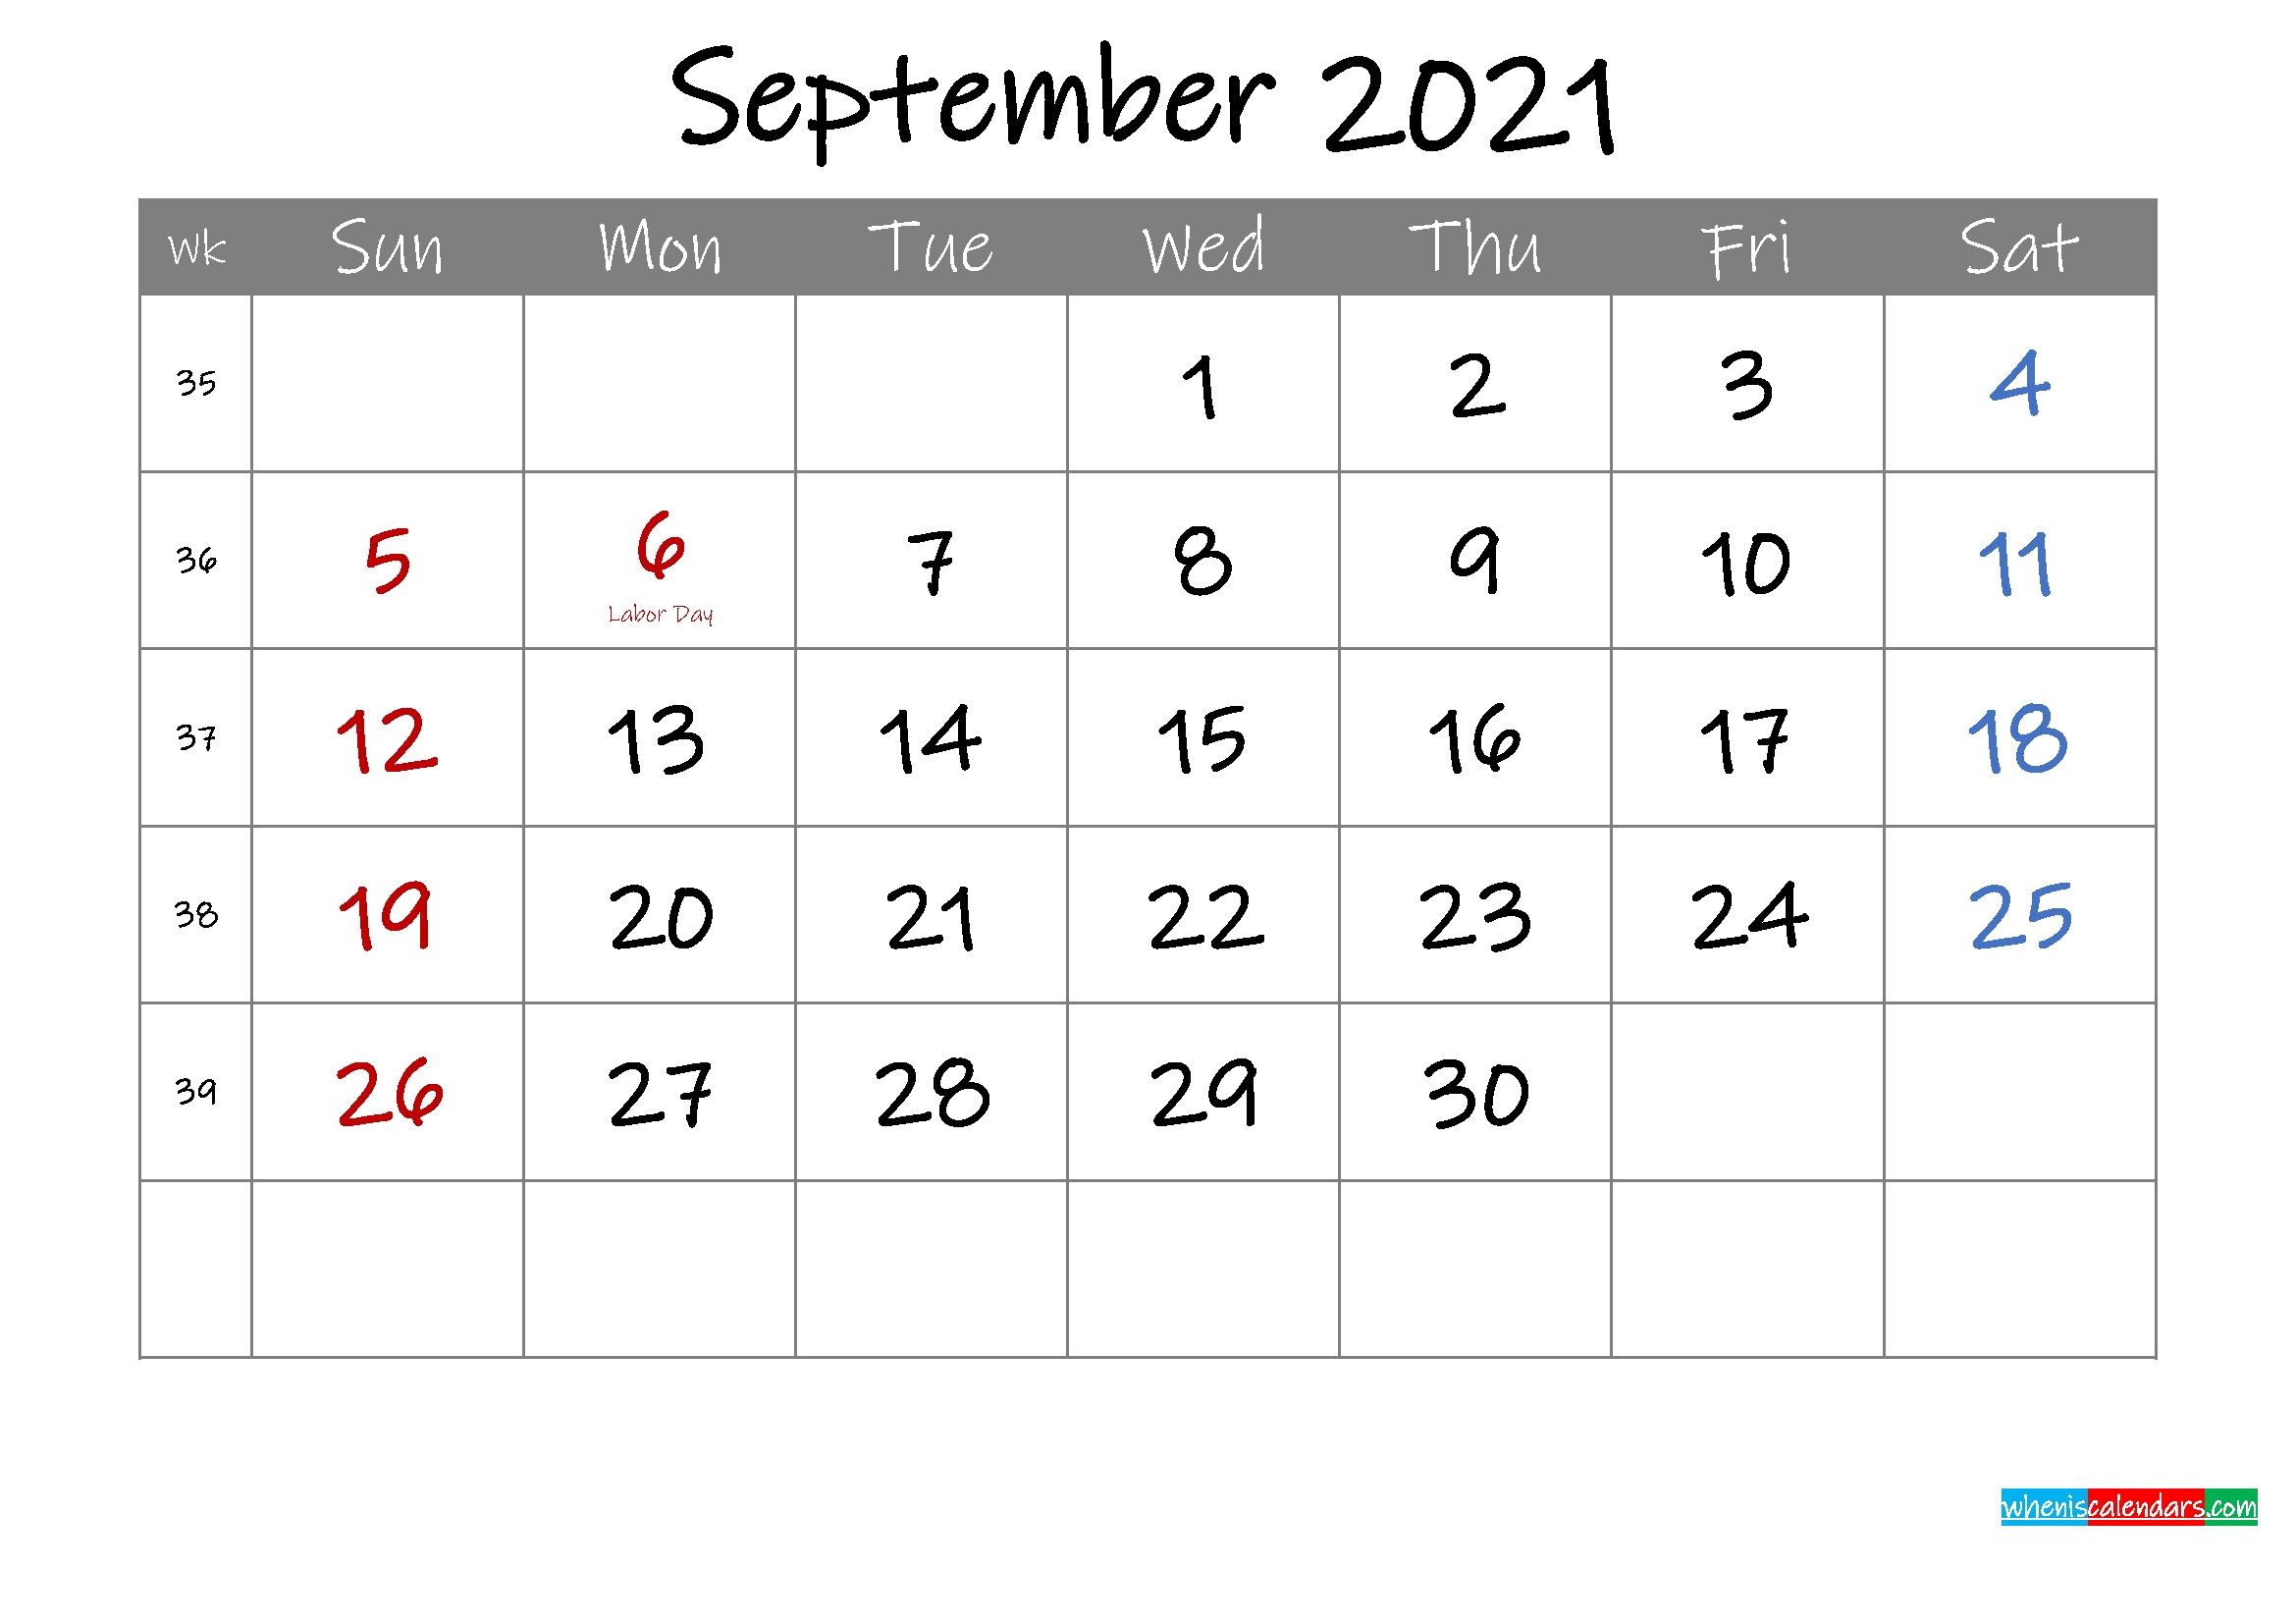 Editable September 2021 Calendar With Holidays - Template Ink21M9 | Free Printable 2020 Monthly Sept 2020 To July 2021 Calendar